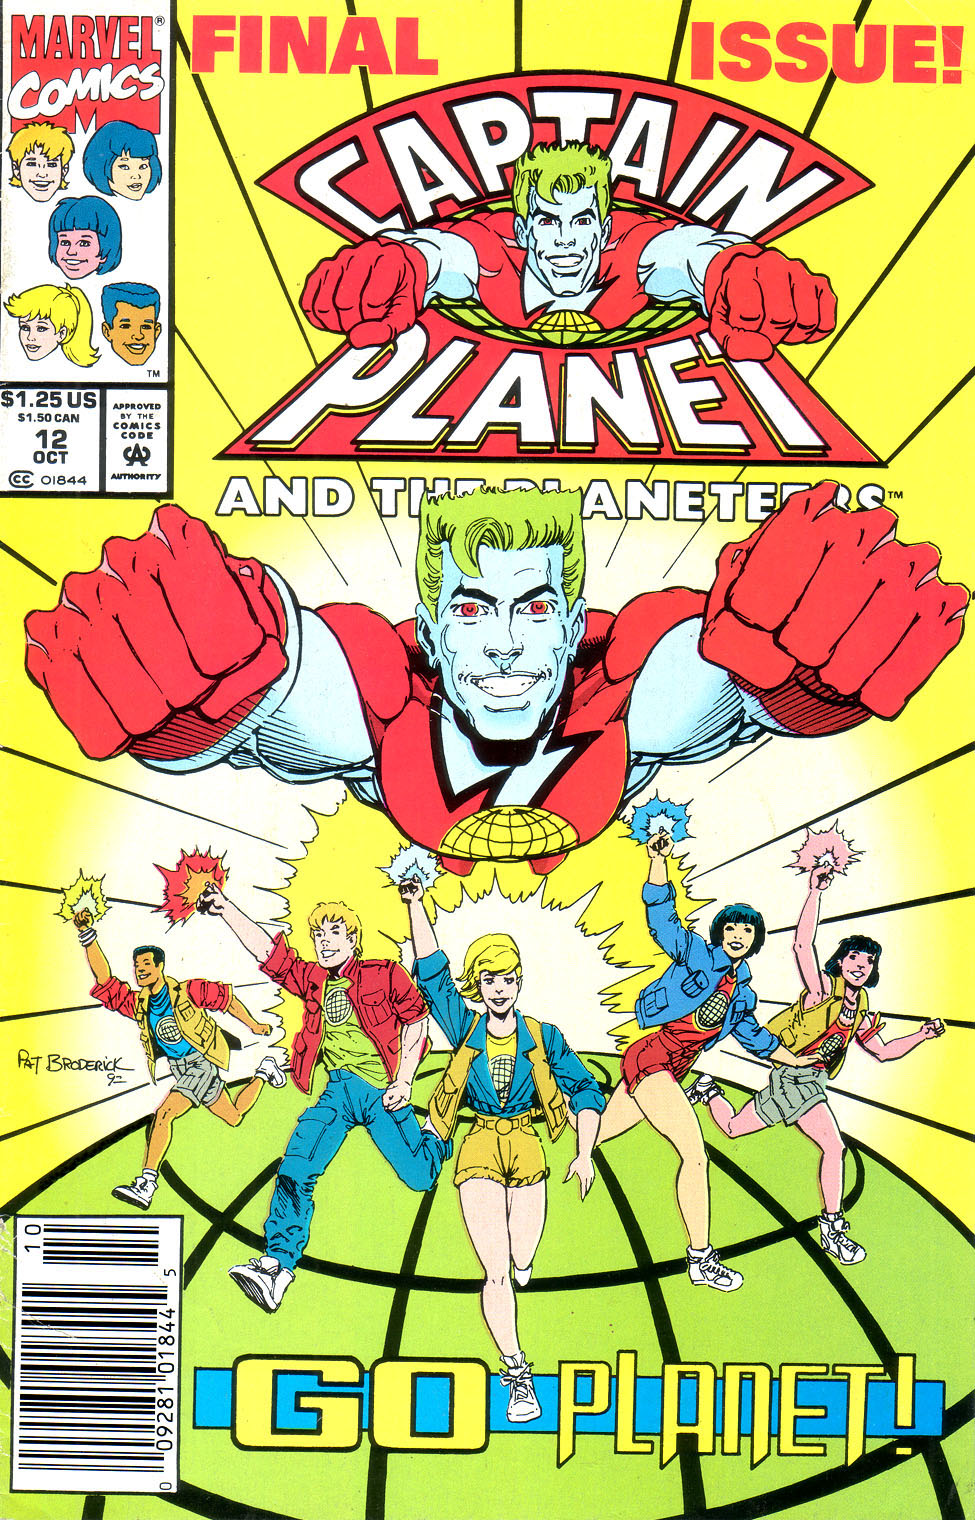 Duke nukem captain planet and the planeteers